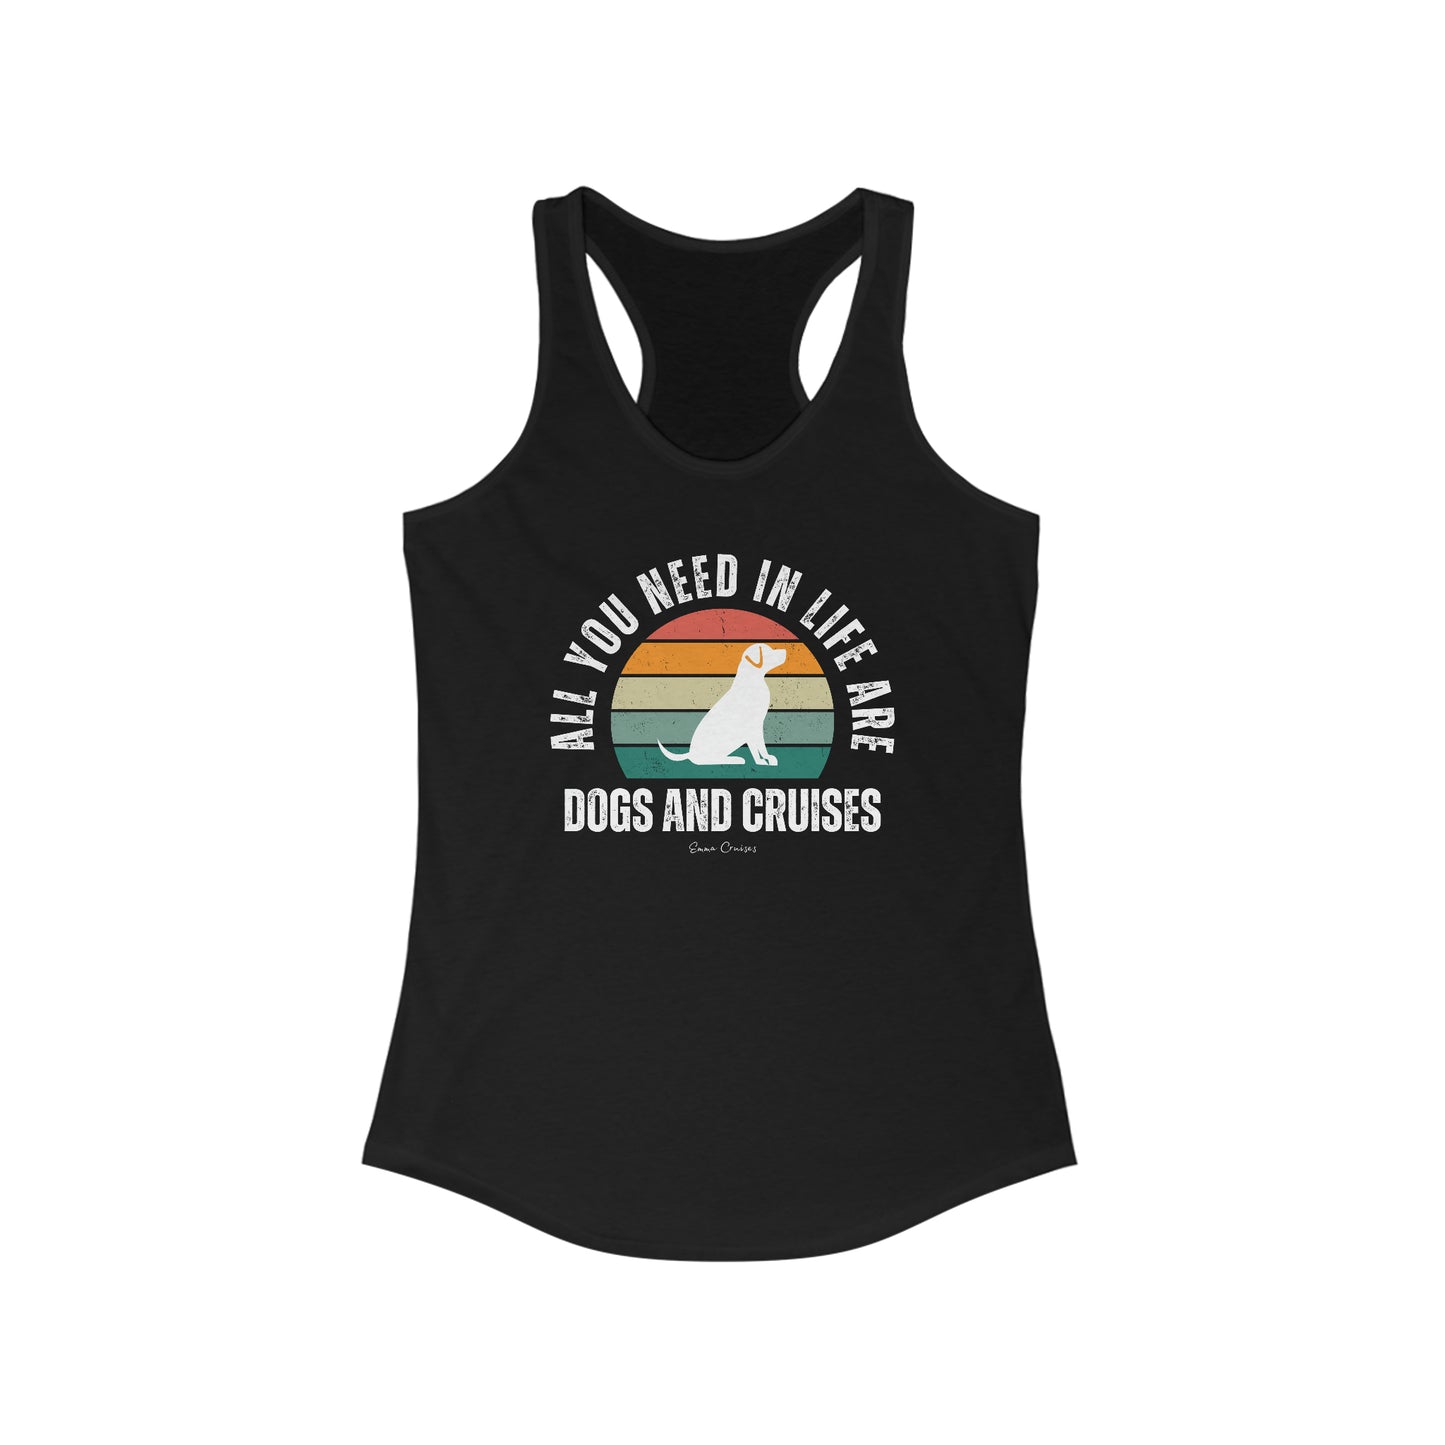 Dogs and Cruises - Tank Top